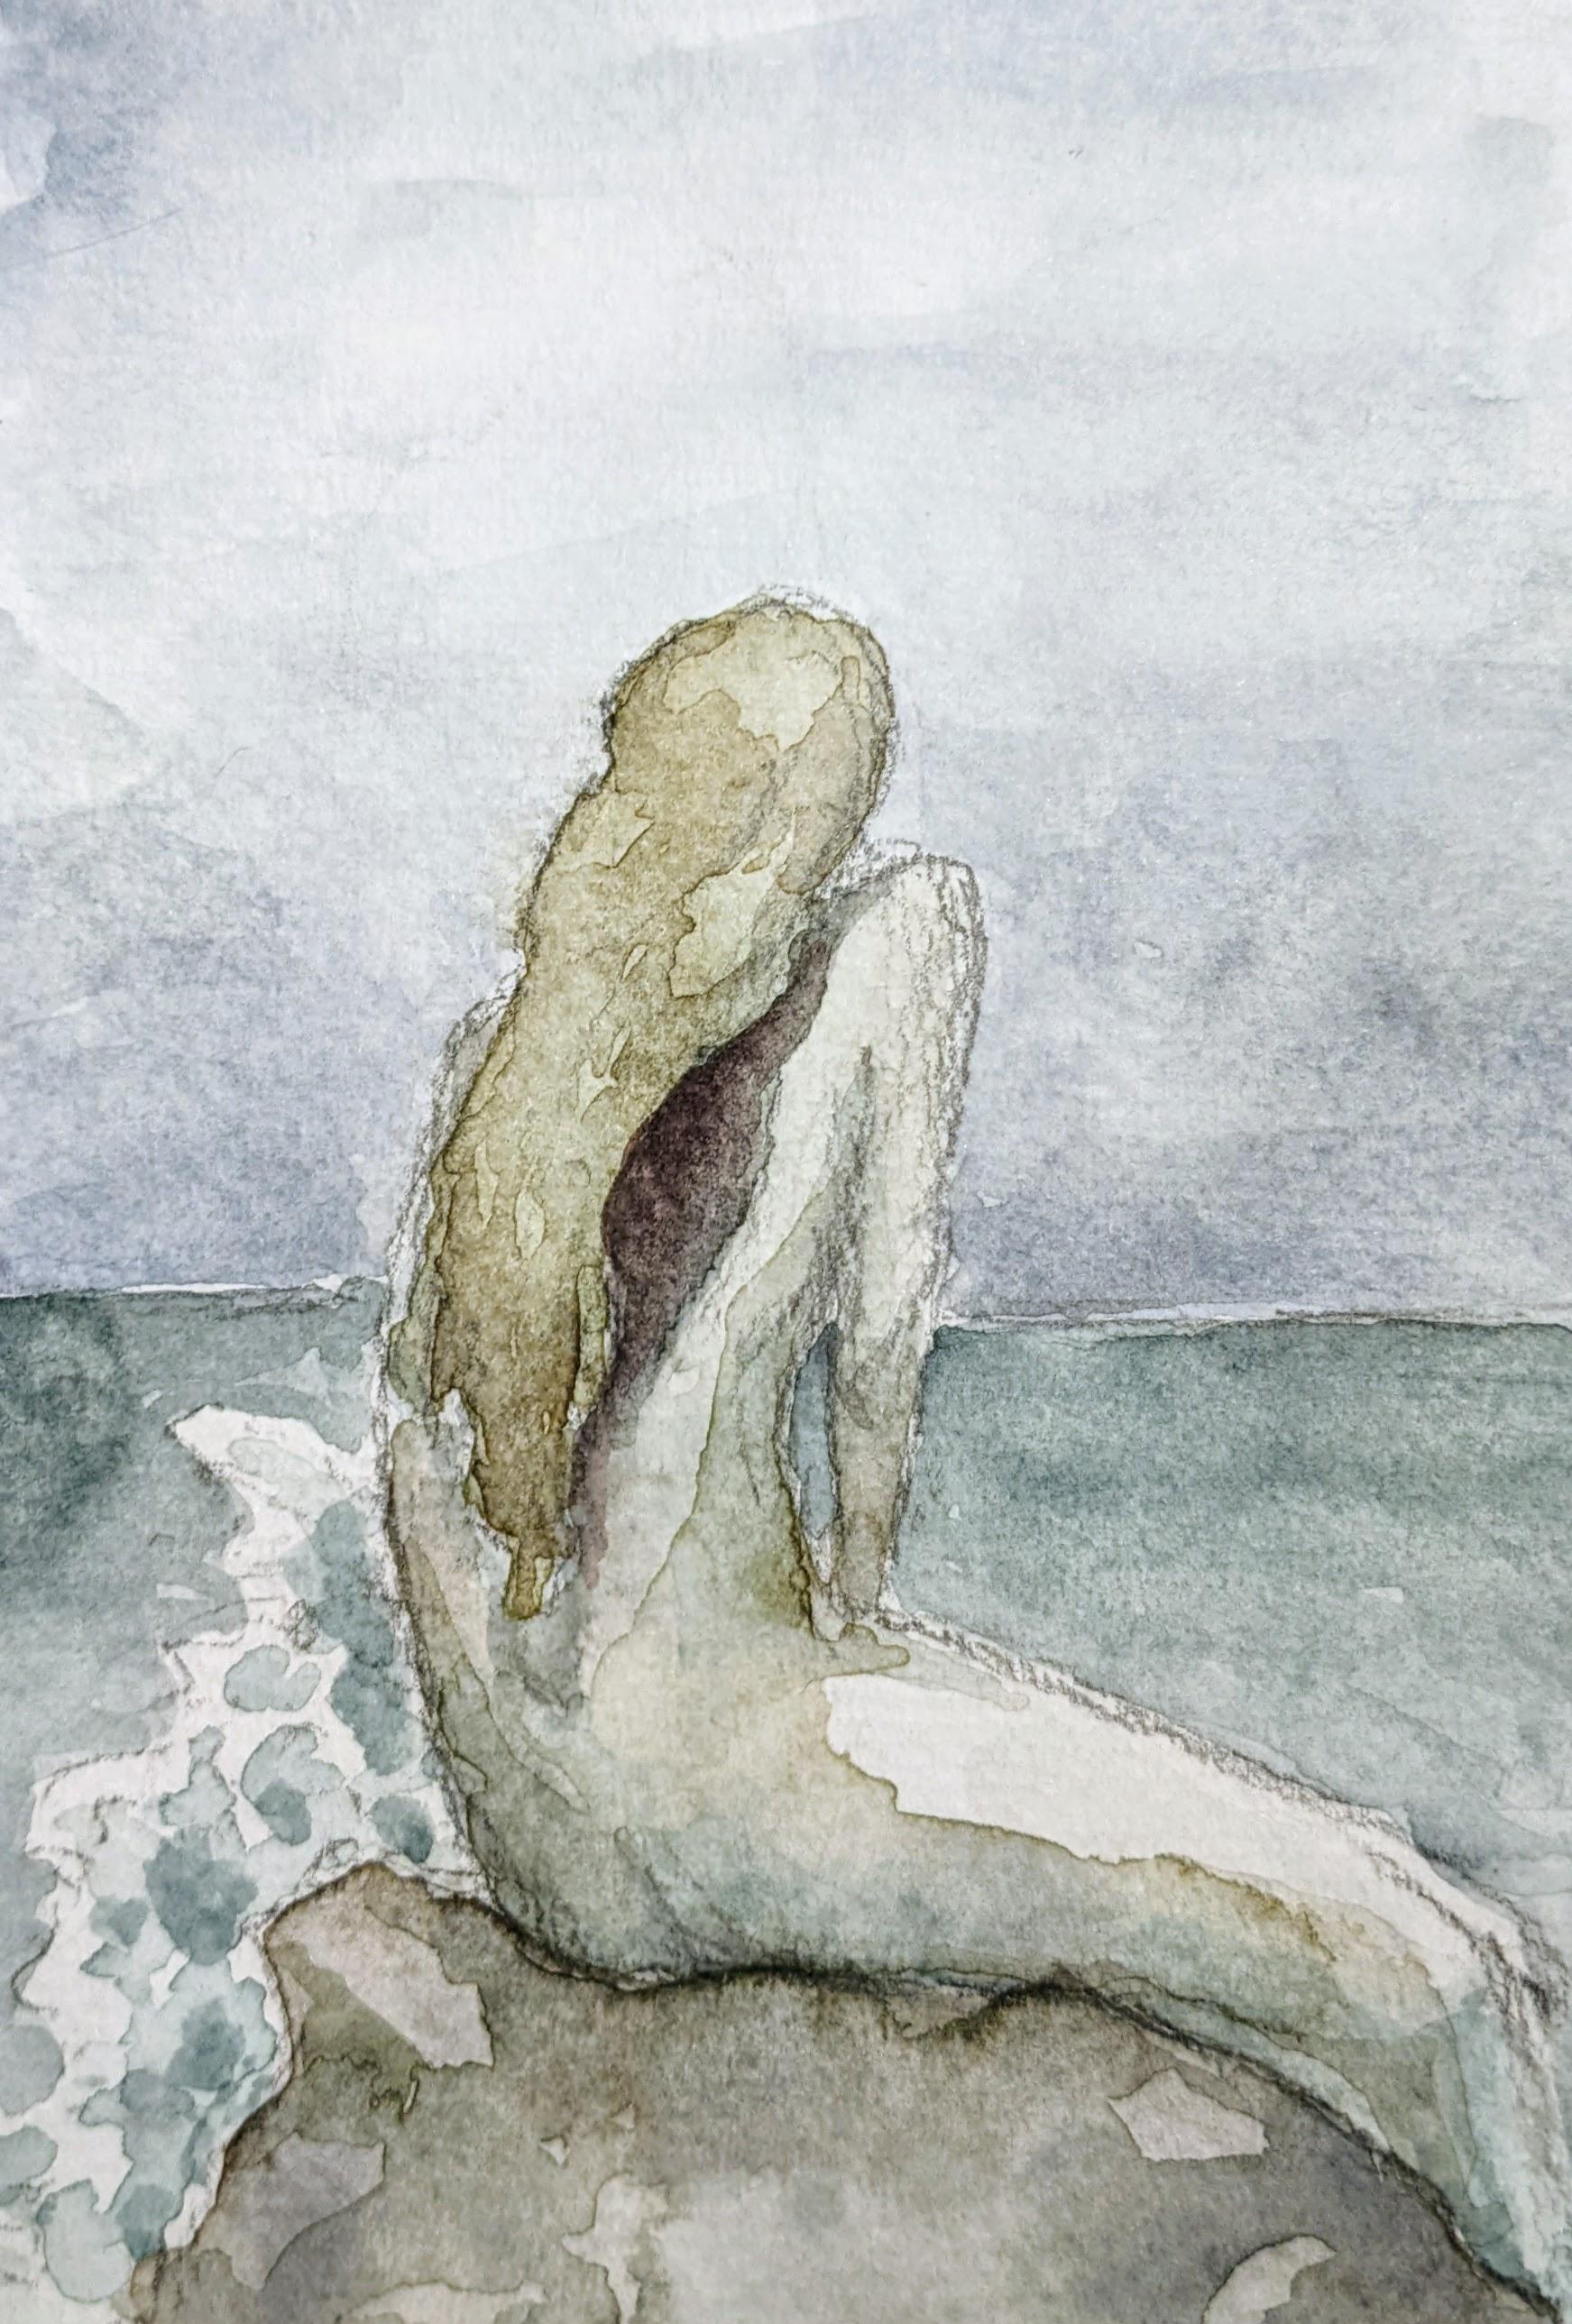 Watercolor a person seated on a rock as sea foam splashes against it.
Their skin and hair, the rocks, the sea, are all in muted blues and greens.